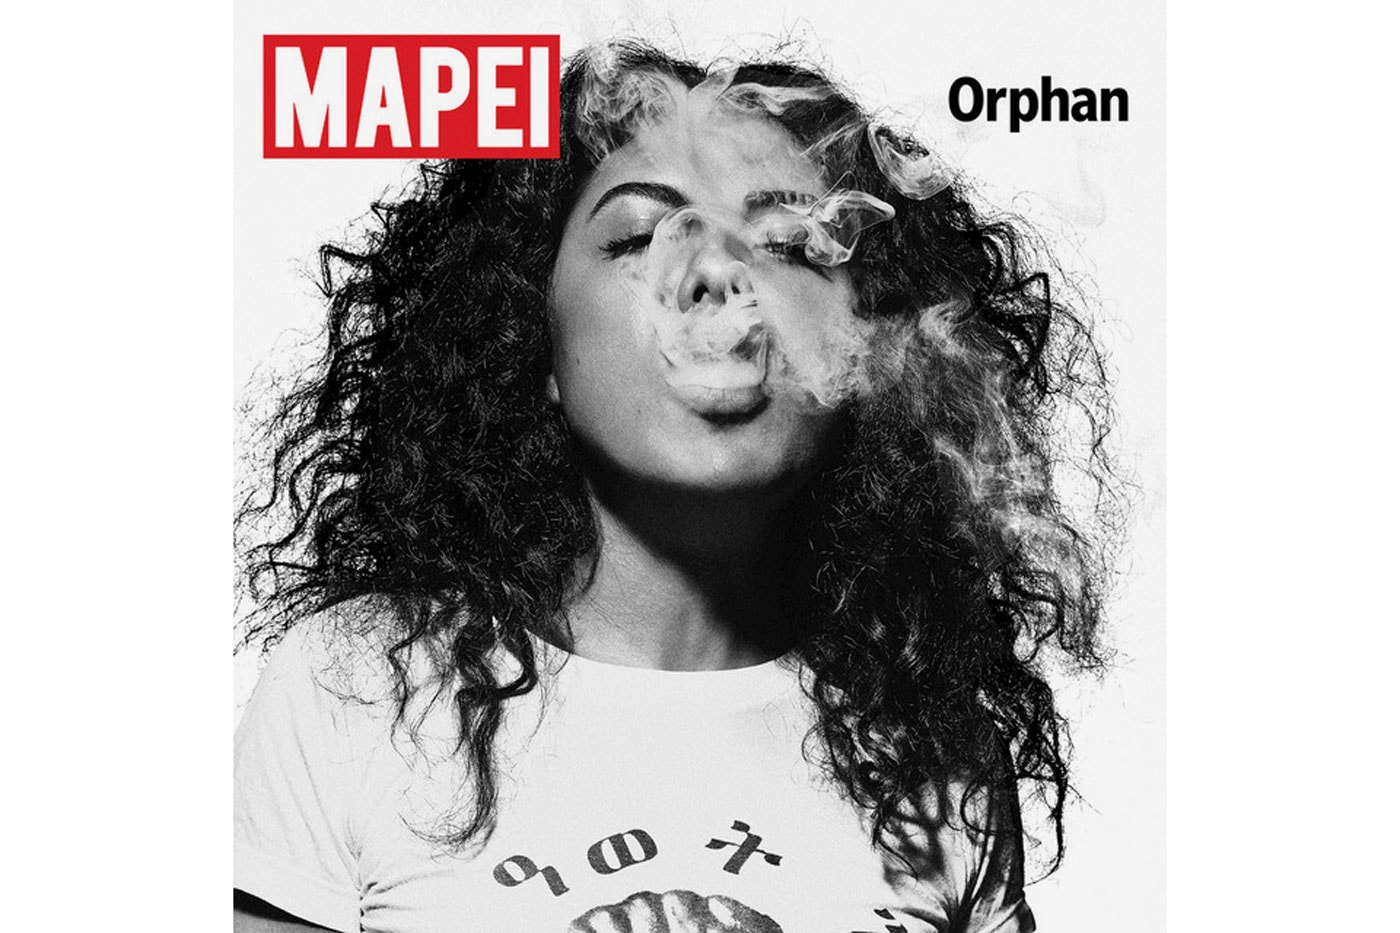 Watch Mapei's New Video Single, "Orphan"